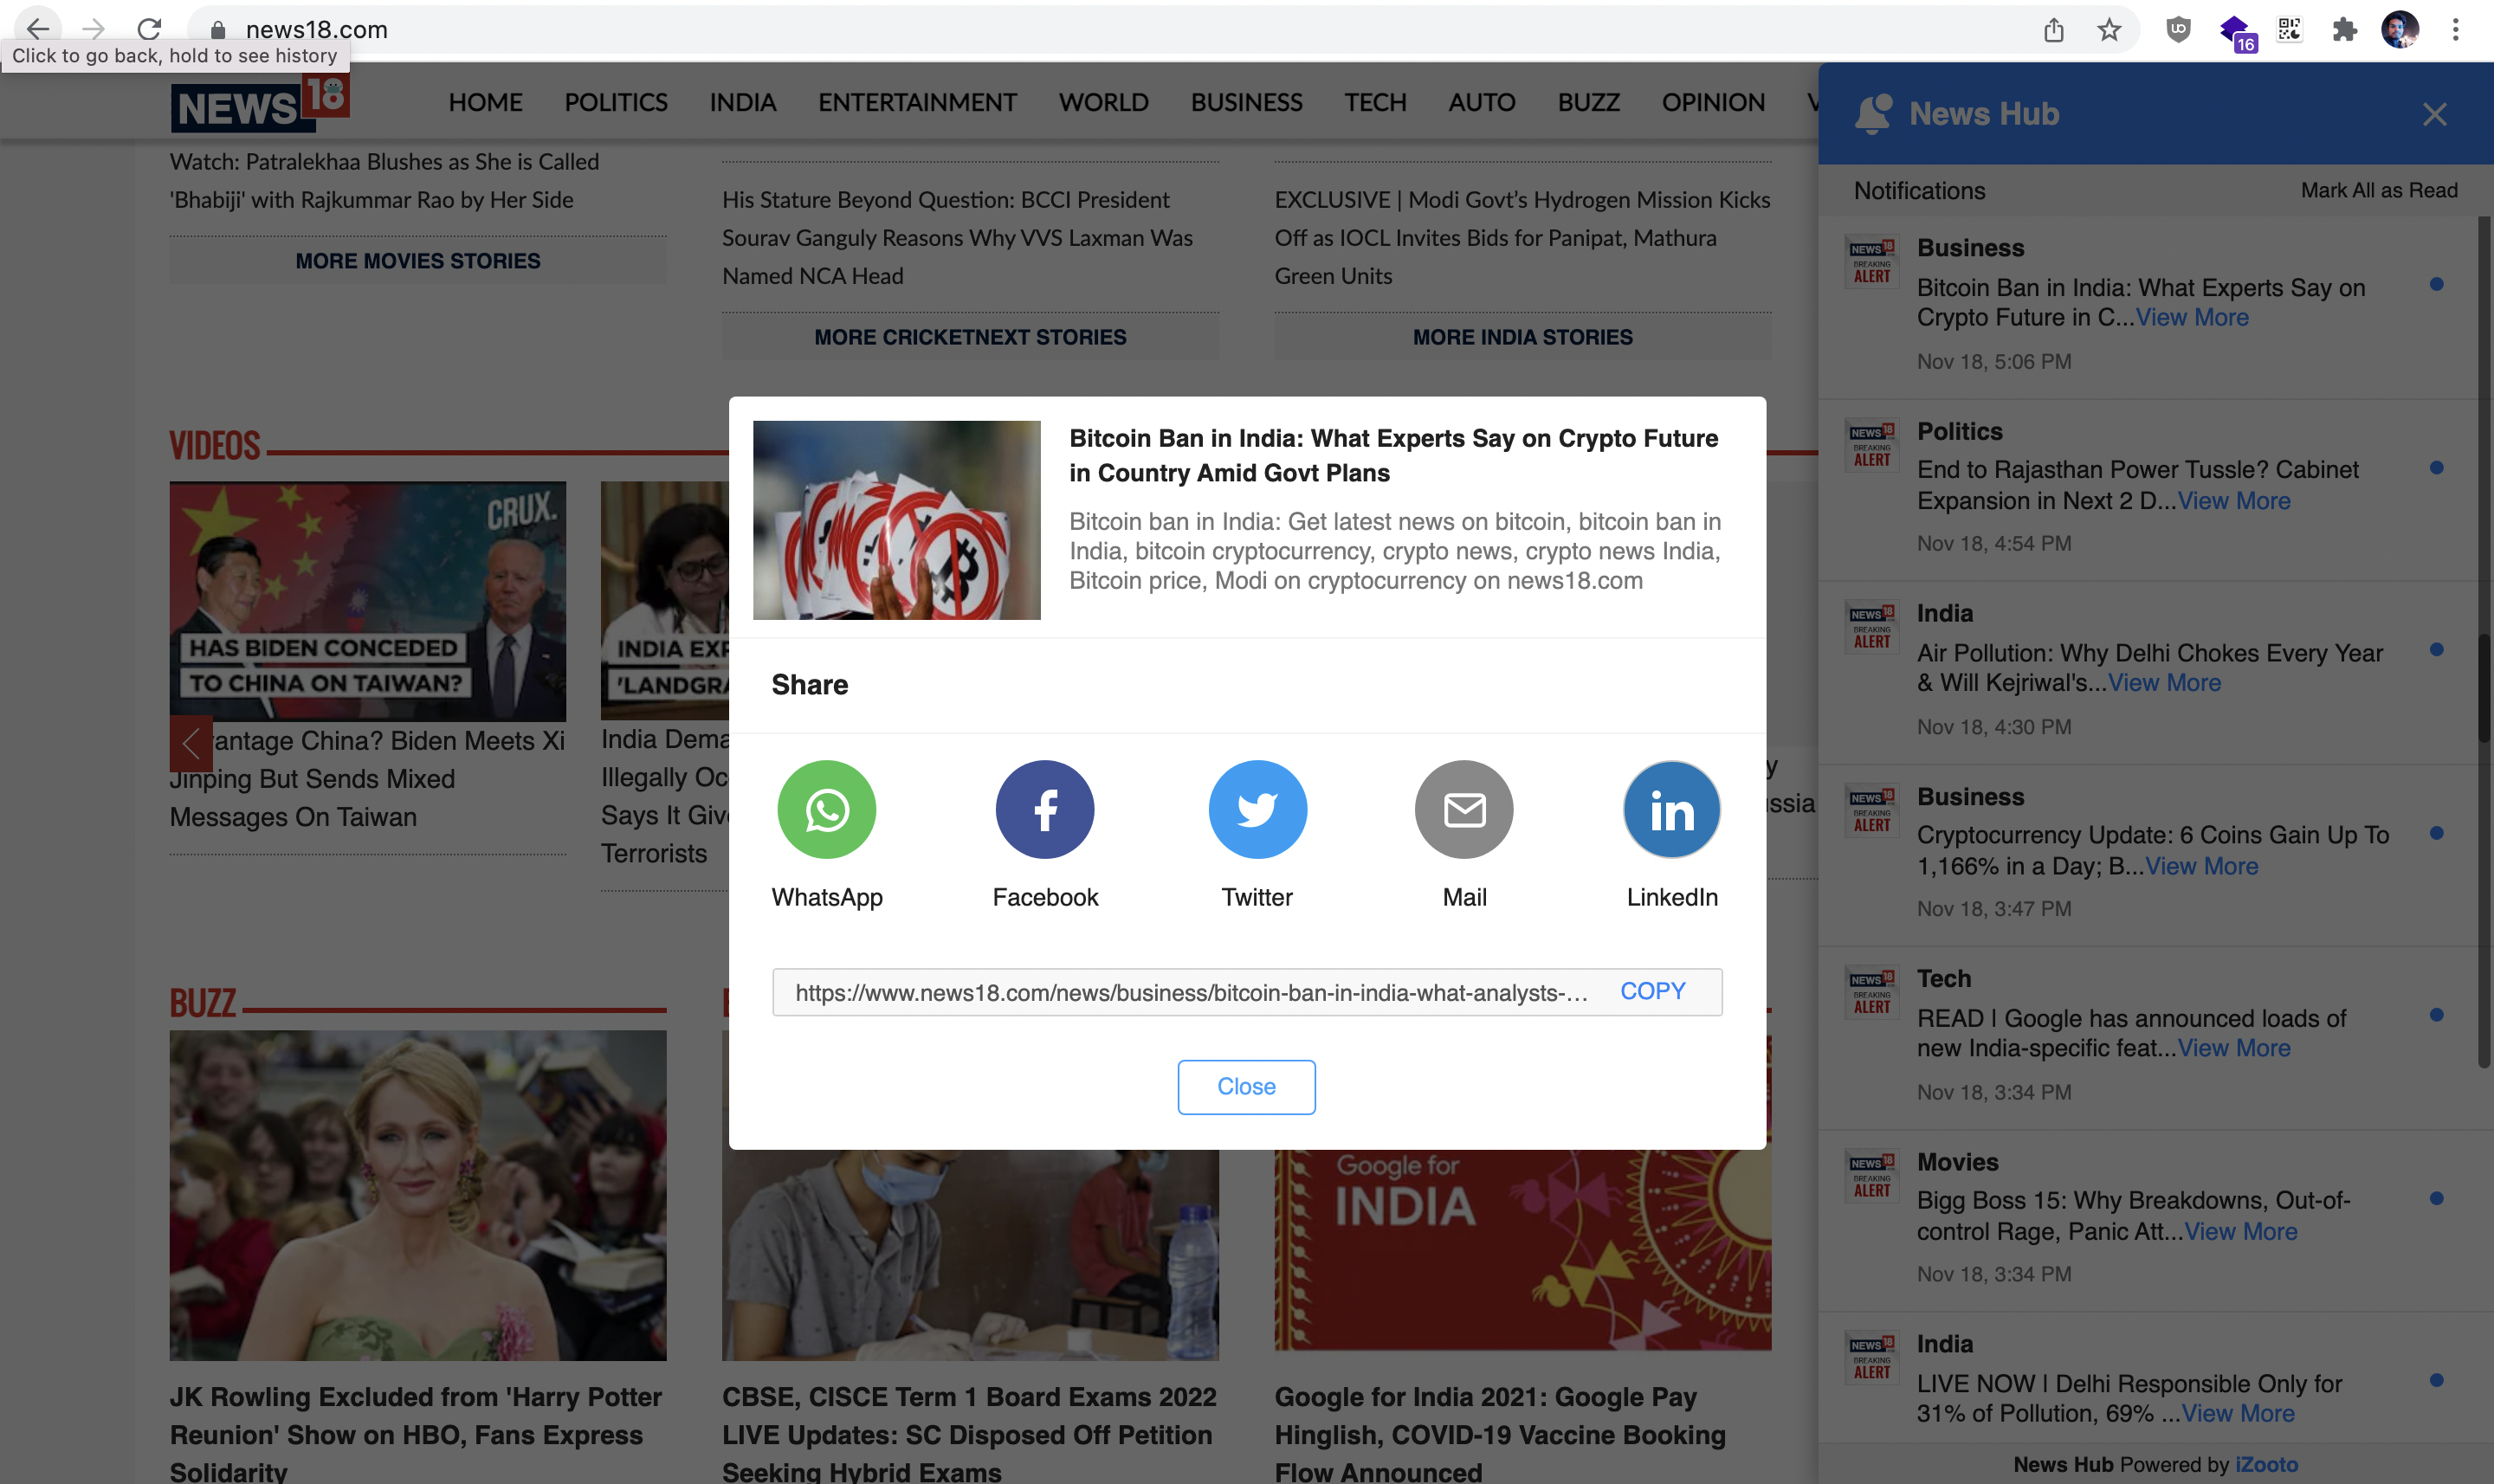 Users have the ability to share the articles on their liking on Social Channels, directly from News Hub.